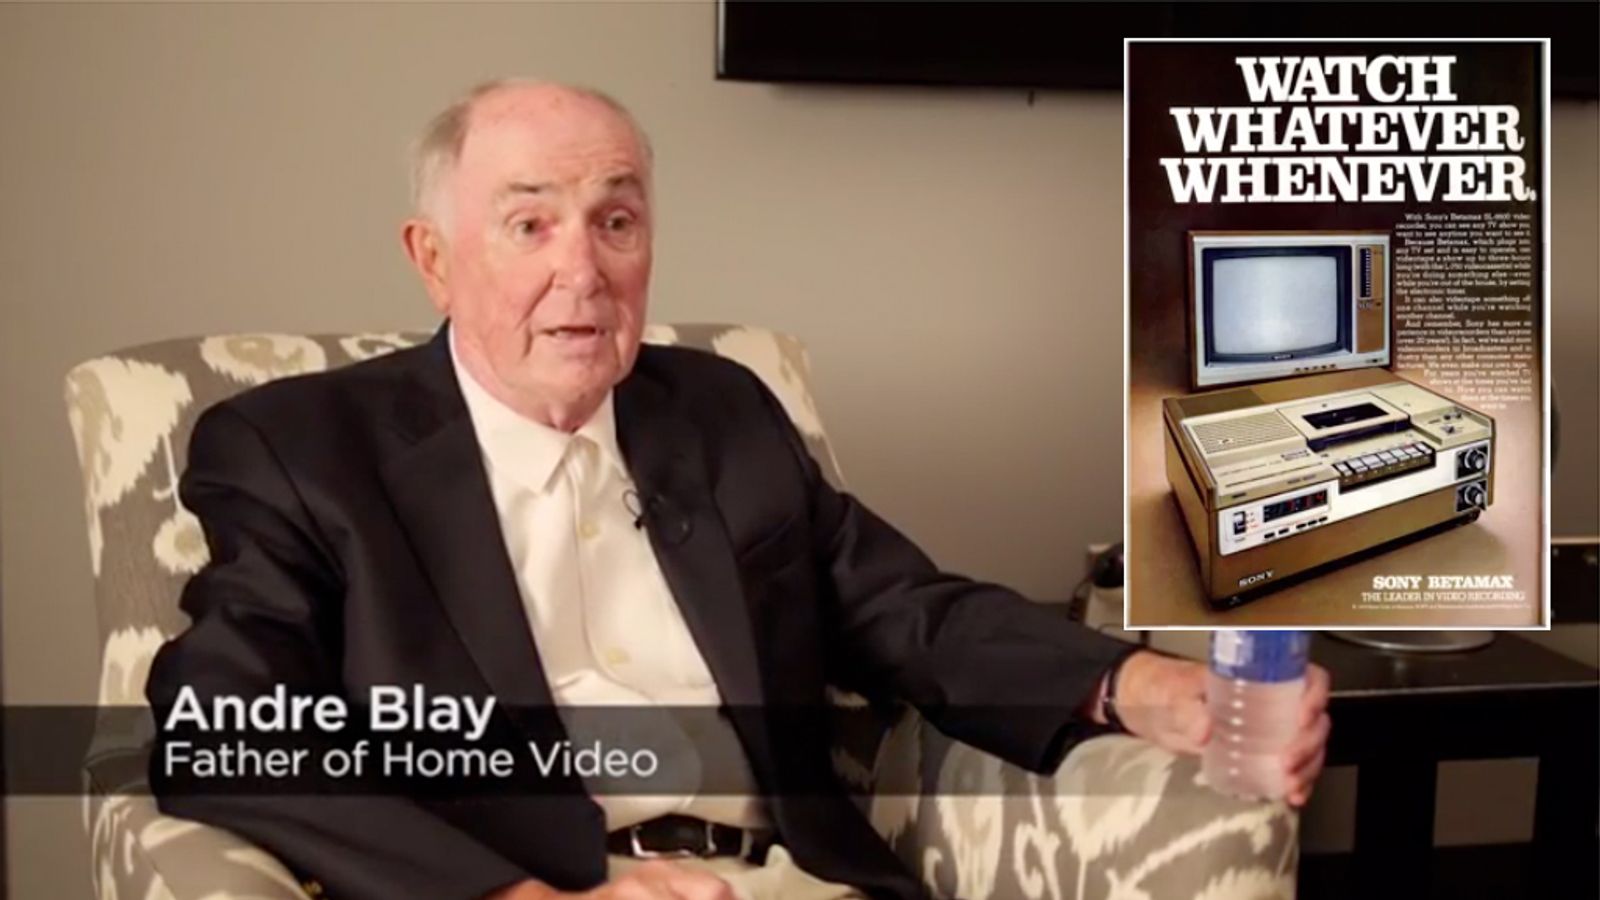 Home Video Visionary Andre Blay Passes